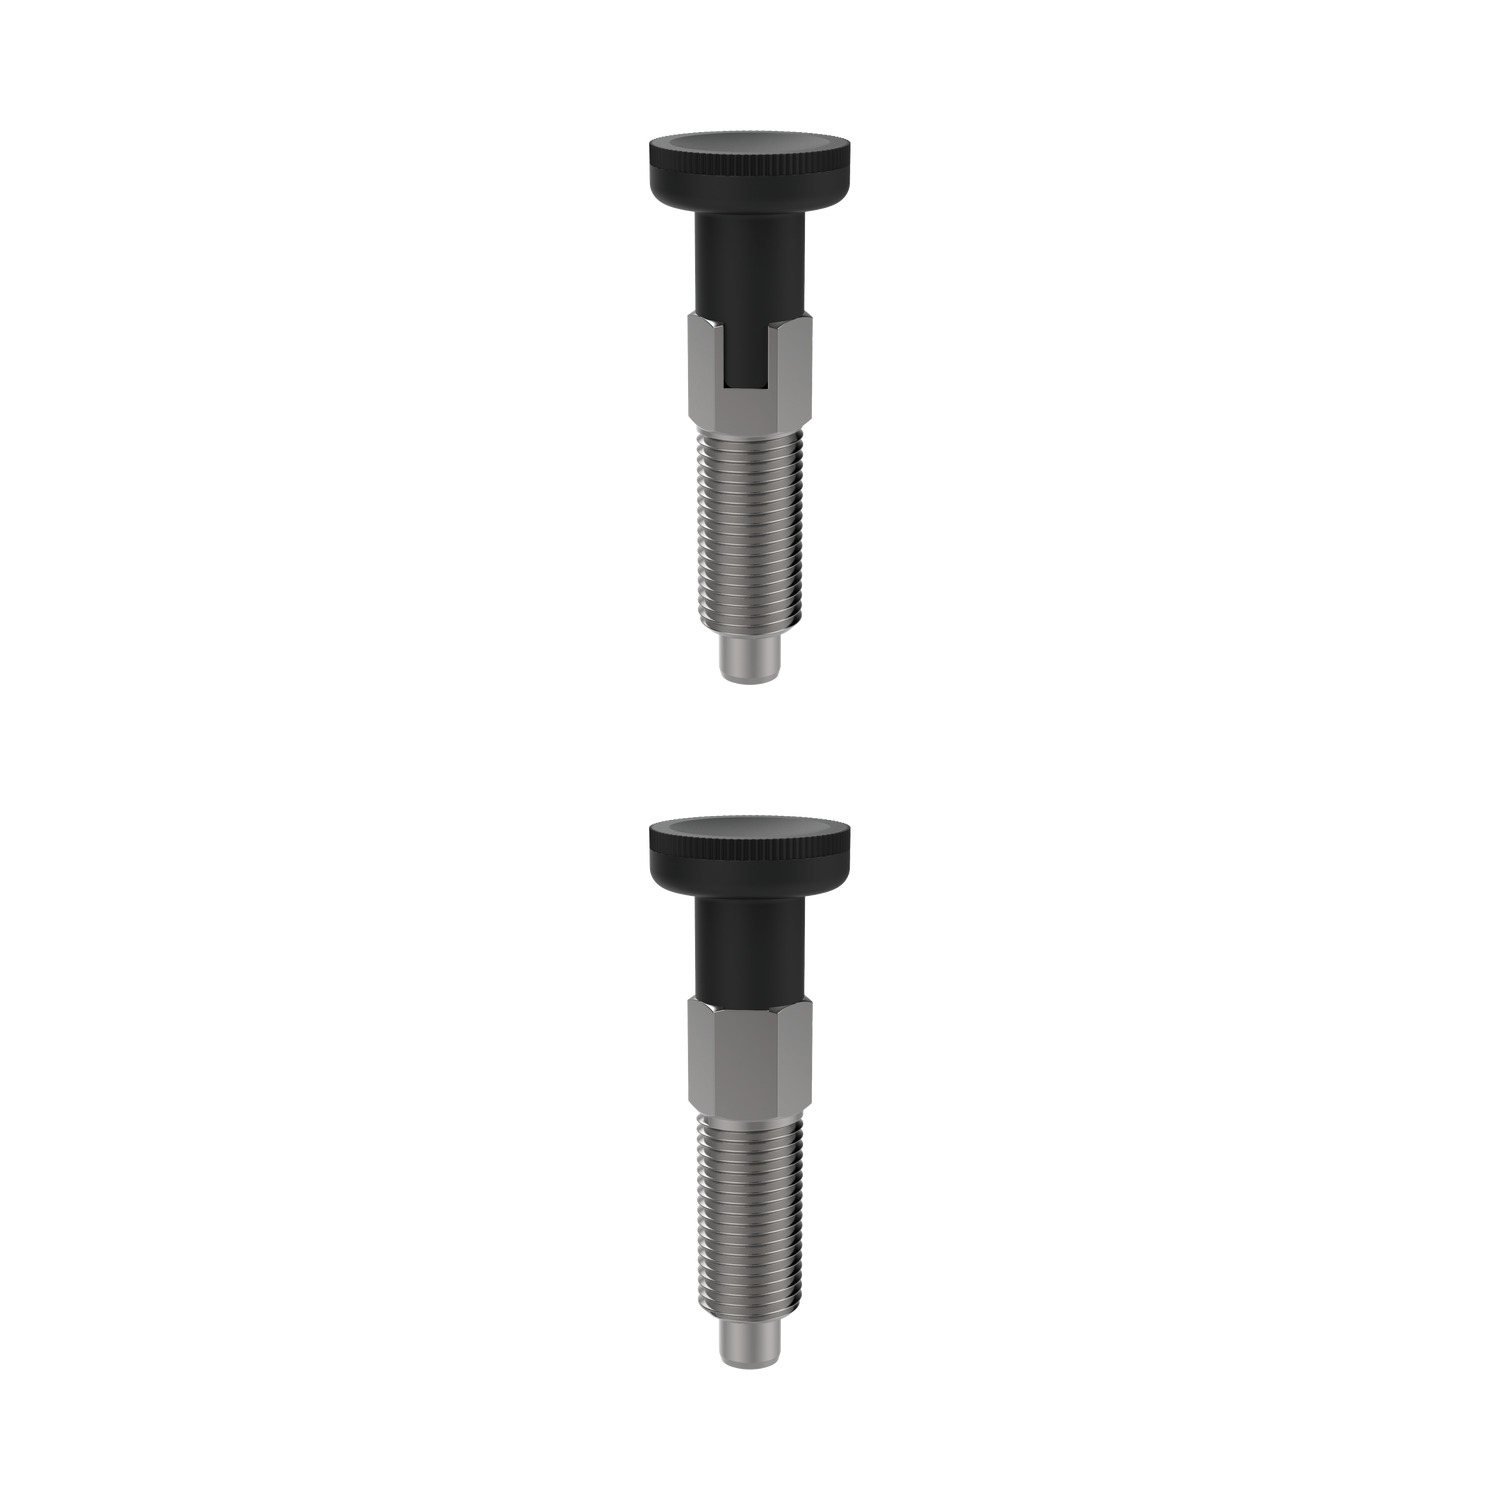 Index Plungers - Pull Grip Index plungers are ideal for quick and simple manual indexing purposes.